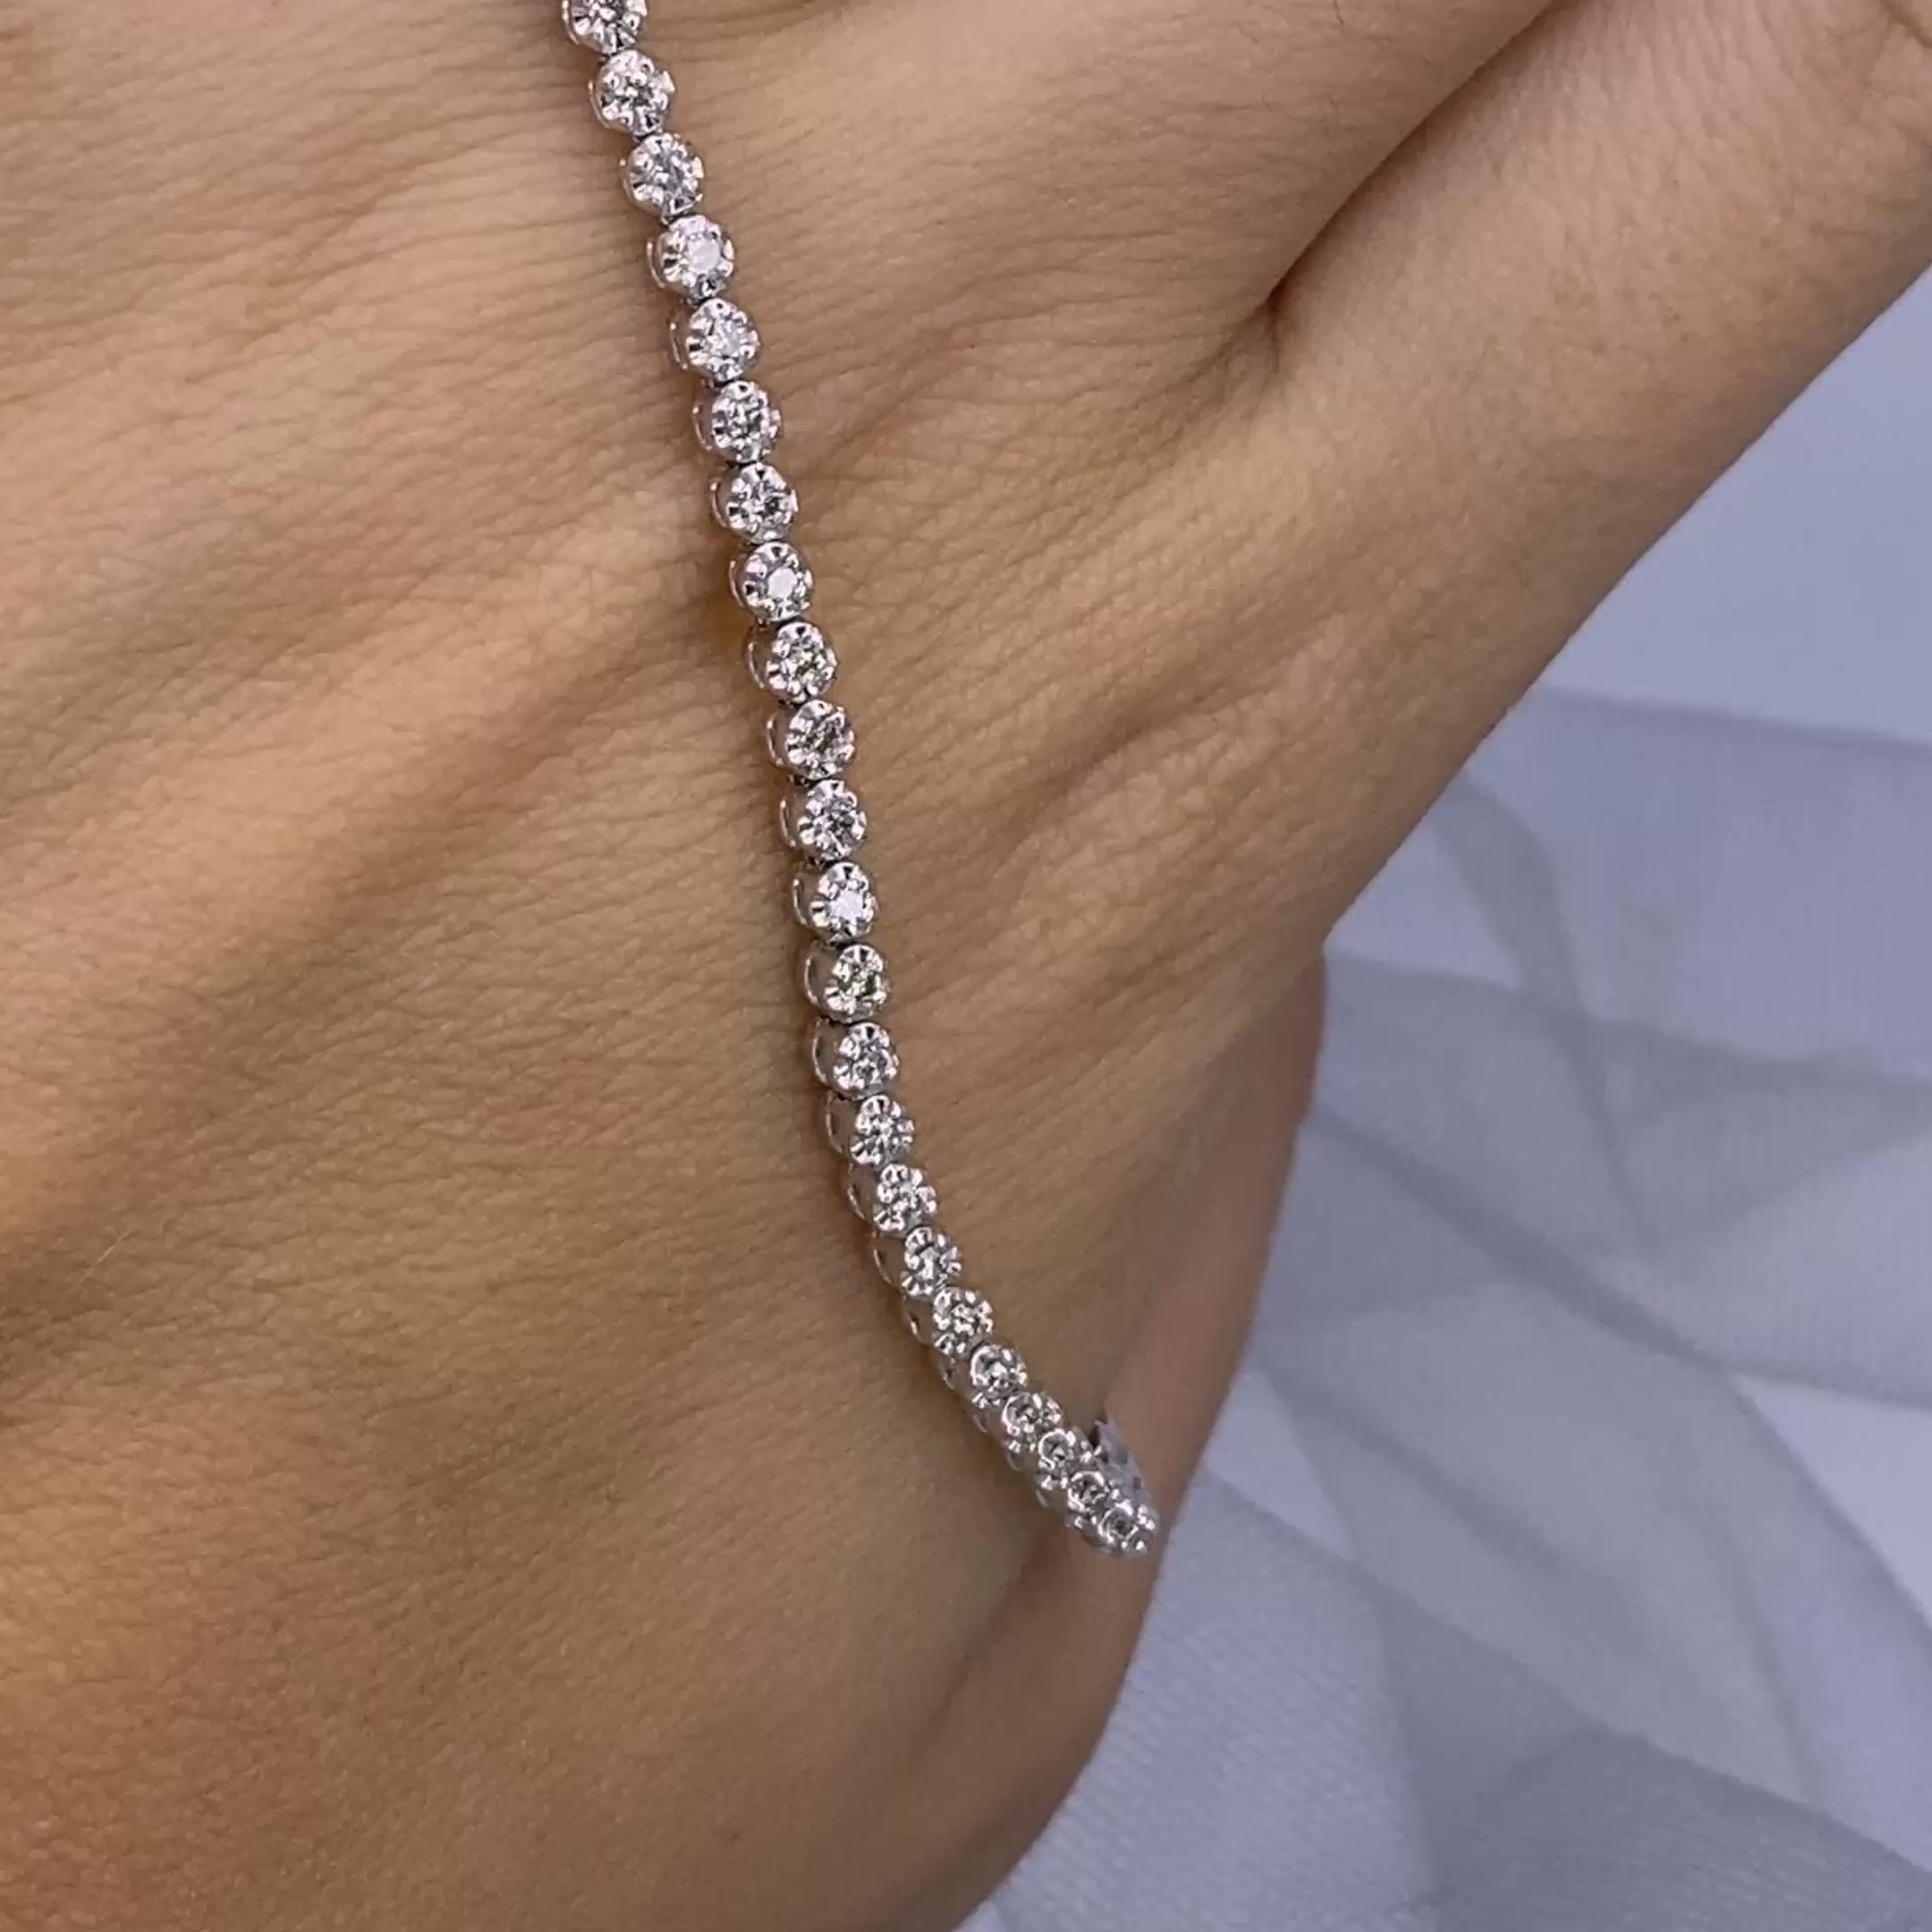 Sophisticated 1.00 CT Round Cut Diamond Tennis Bracelet in 14KT White Gold